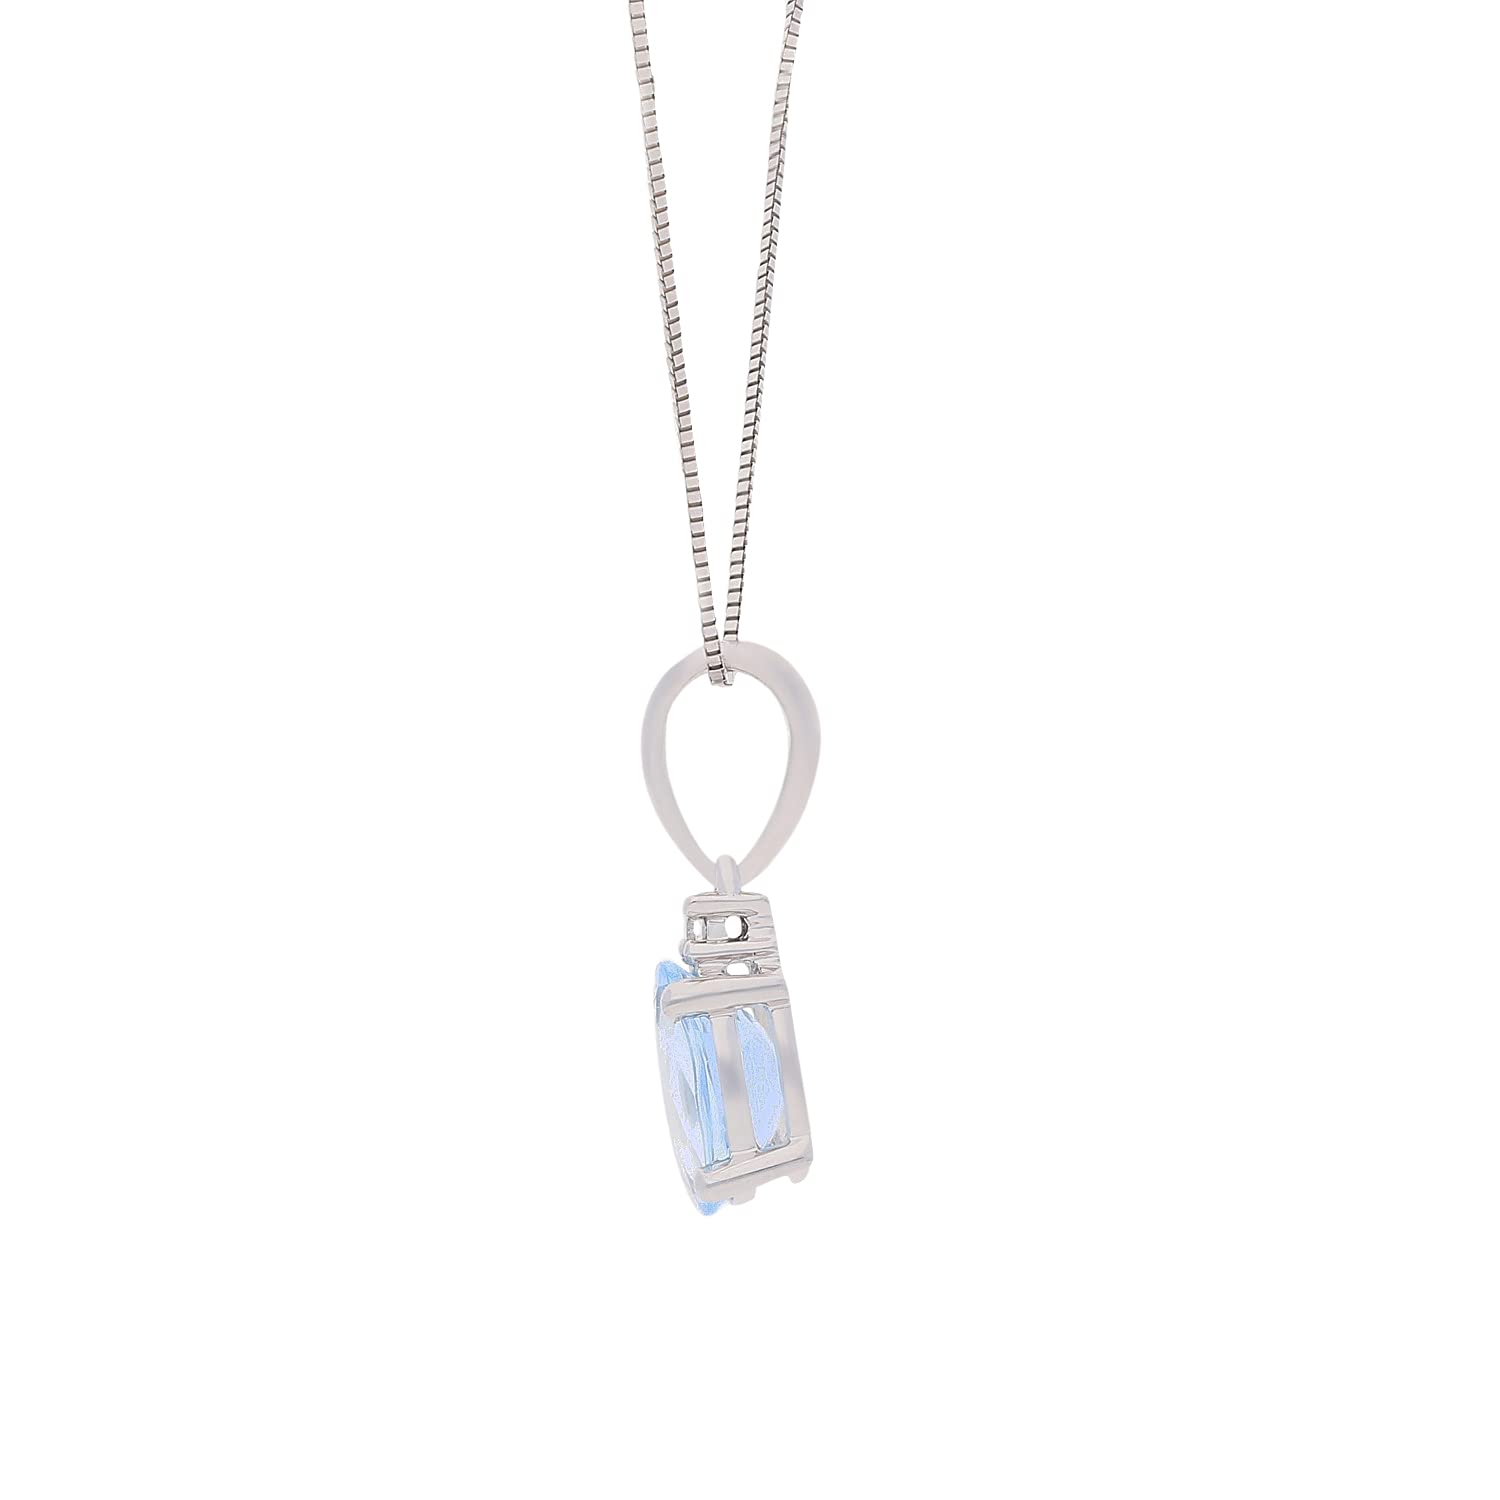 Gin & Grace 10K White Gold Genuine Aquamarine Pendant with Diamonds for women | Ethically, authentically & organically sourced (Oval-cut) shaped Aquamarine hand-crafted jewelry for her